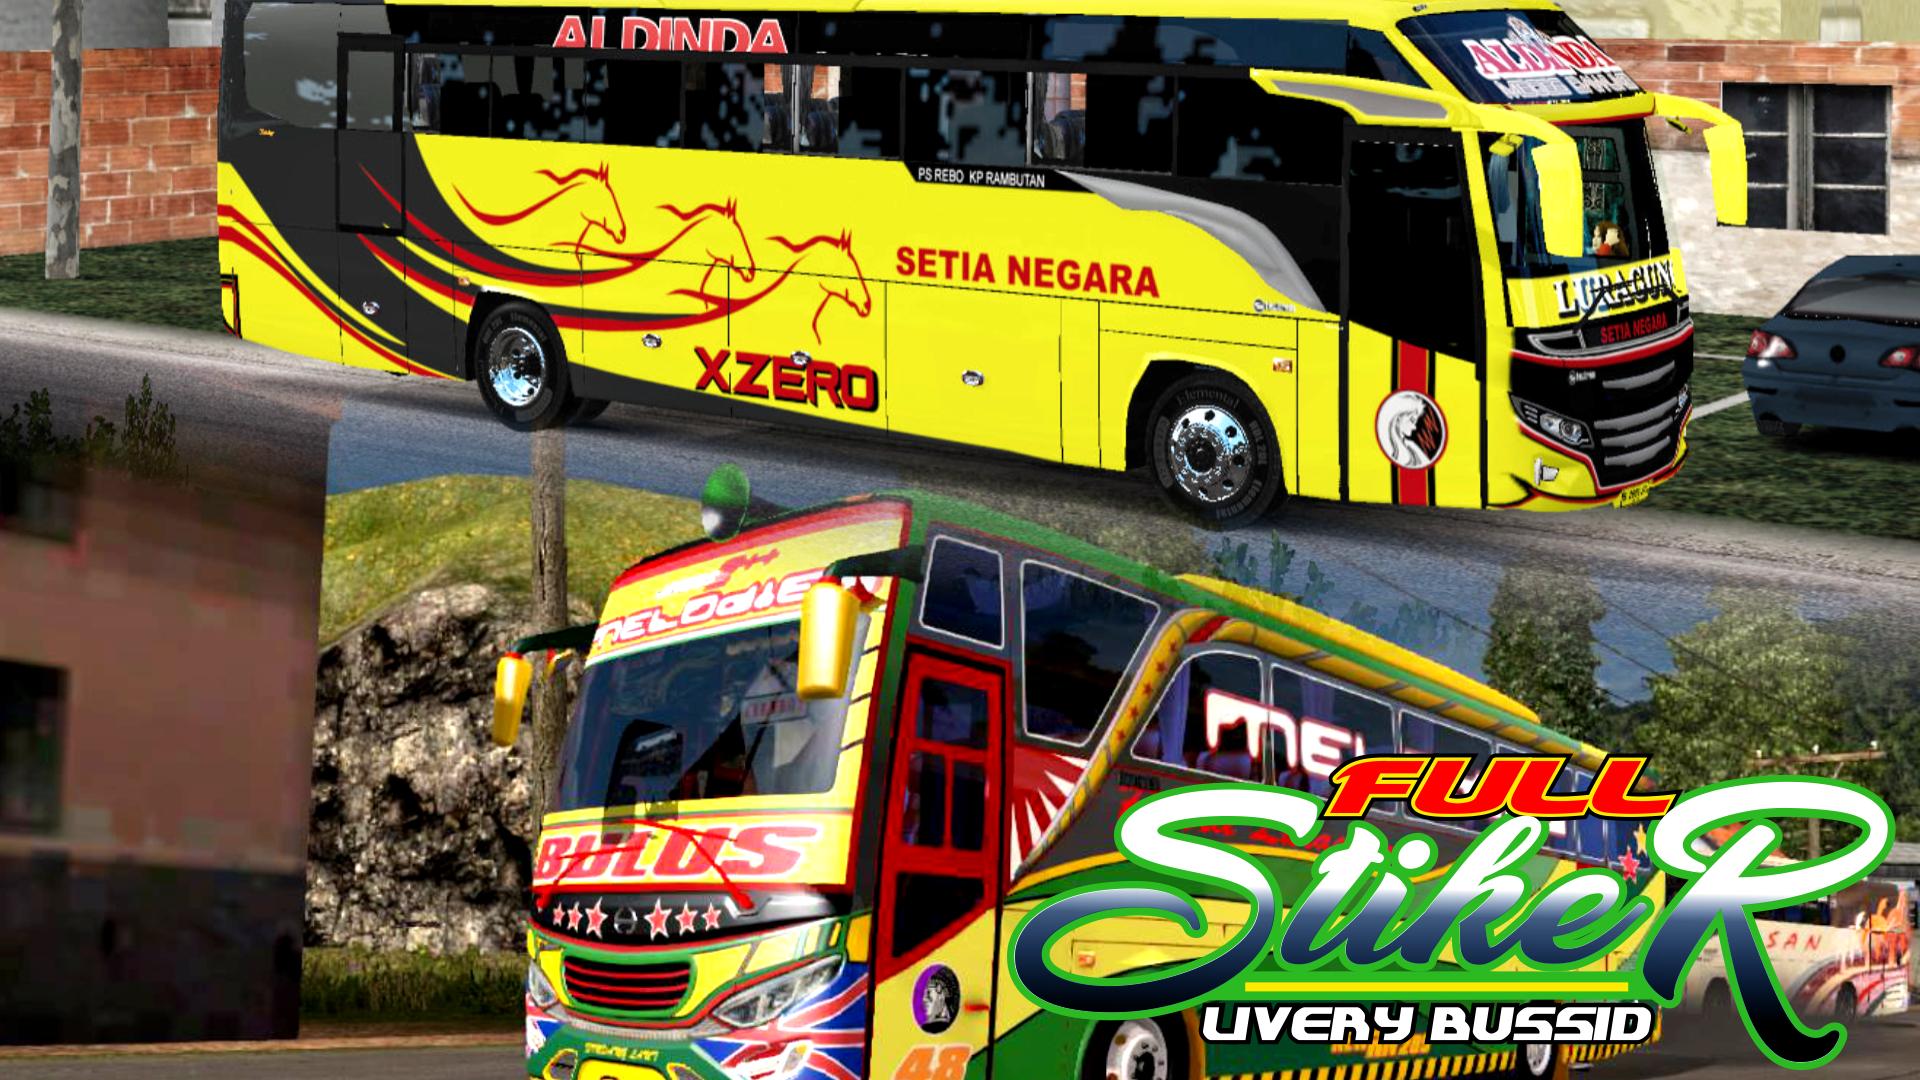 Featured image of post Stiker Bus Livery Bussid Shd Full Stiker This is a limited edition application where the application is limited to a bus display that is filled with livery bus simulator hd full sticker where the style and color of the image displayed on the bus body is very interesting